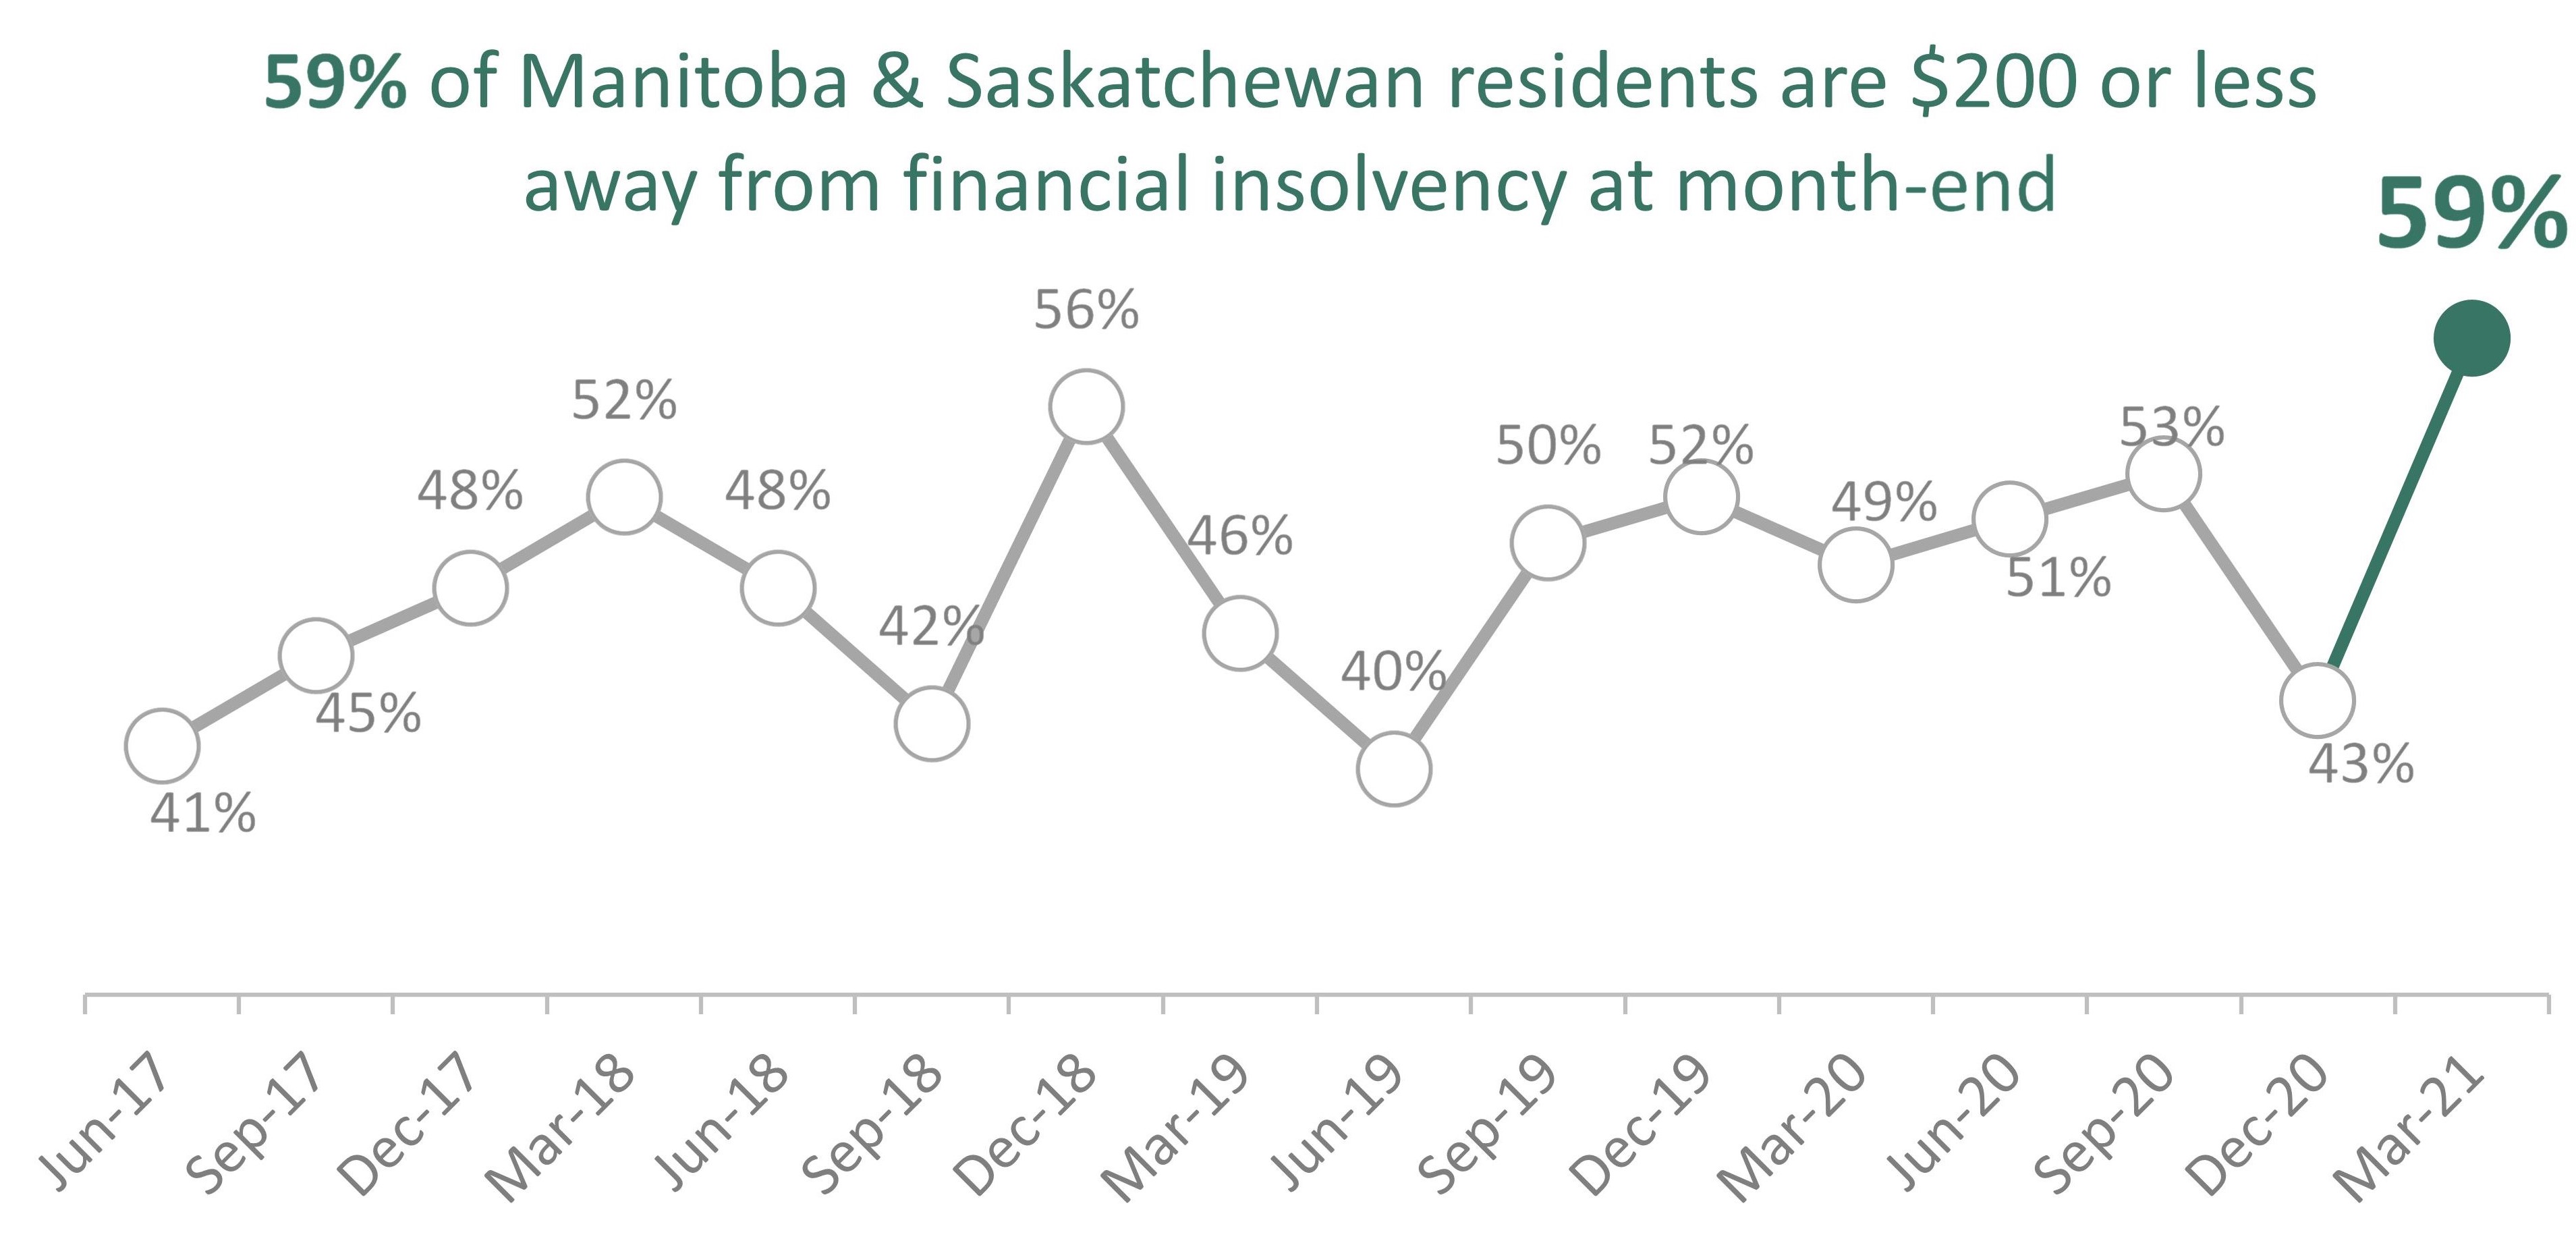 Caption: The number of Manitoba and Saskatchewan residents who are $200 or less from financial insolvency at month-end jumped 16 points since December 2020, reaching a five-year high. 